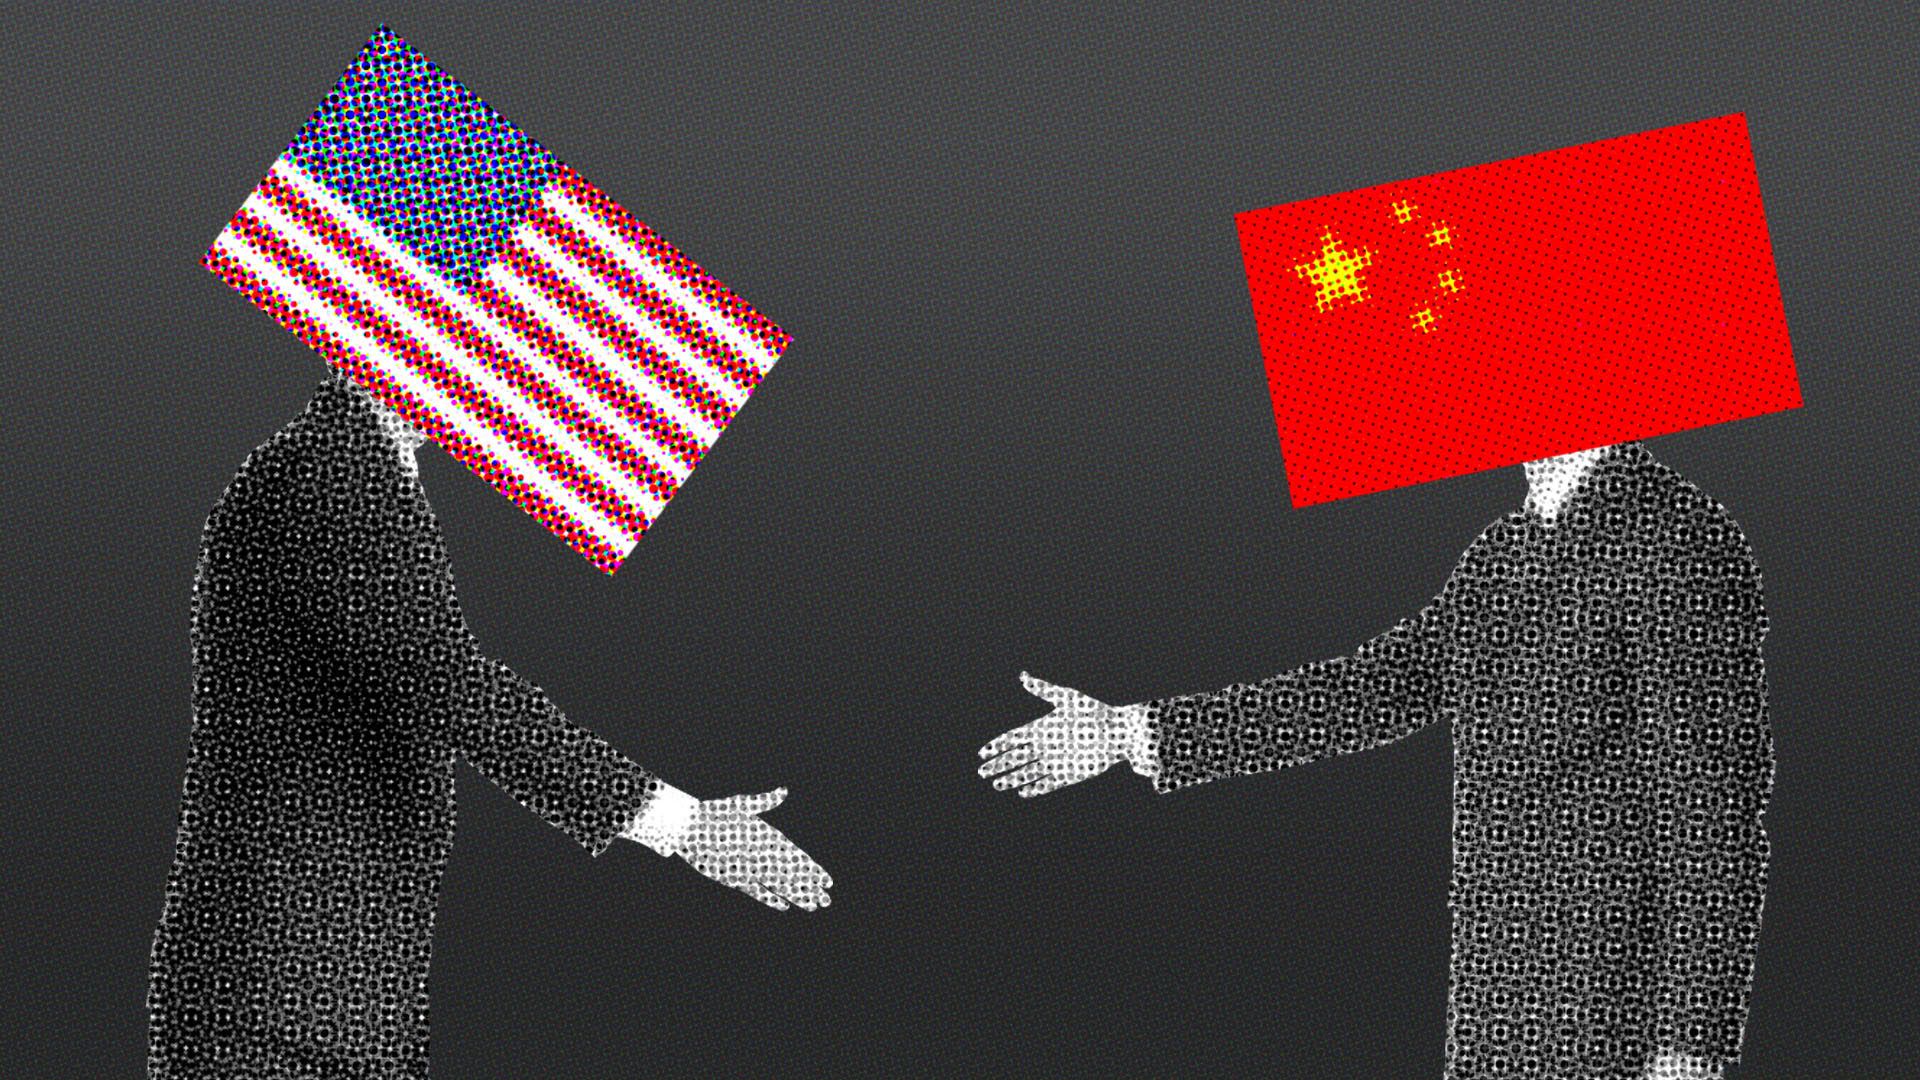 Illustration of two businessmen with a Chinese flag and a U.S. flag standing far apart